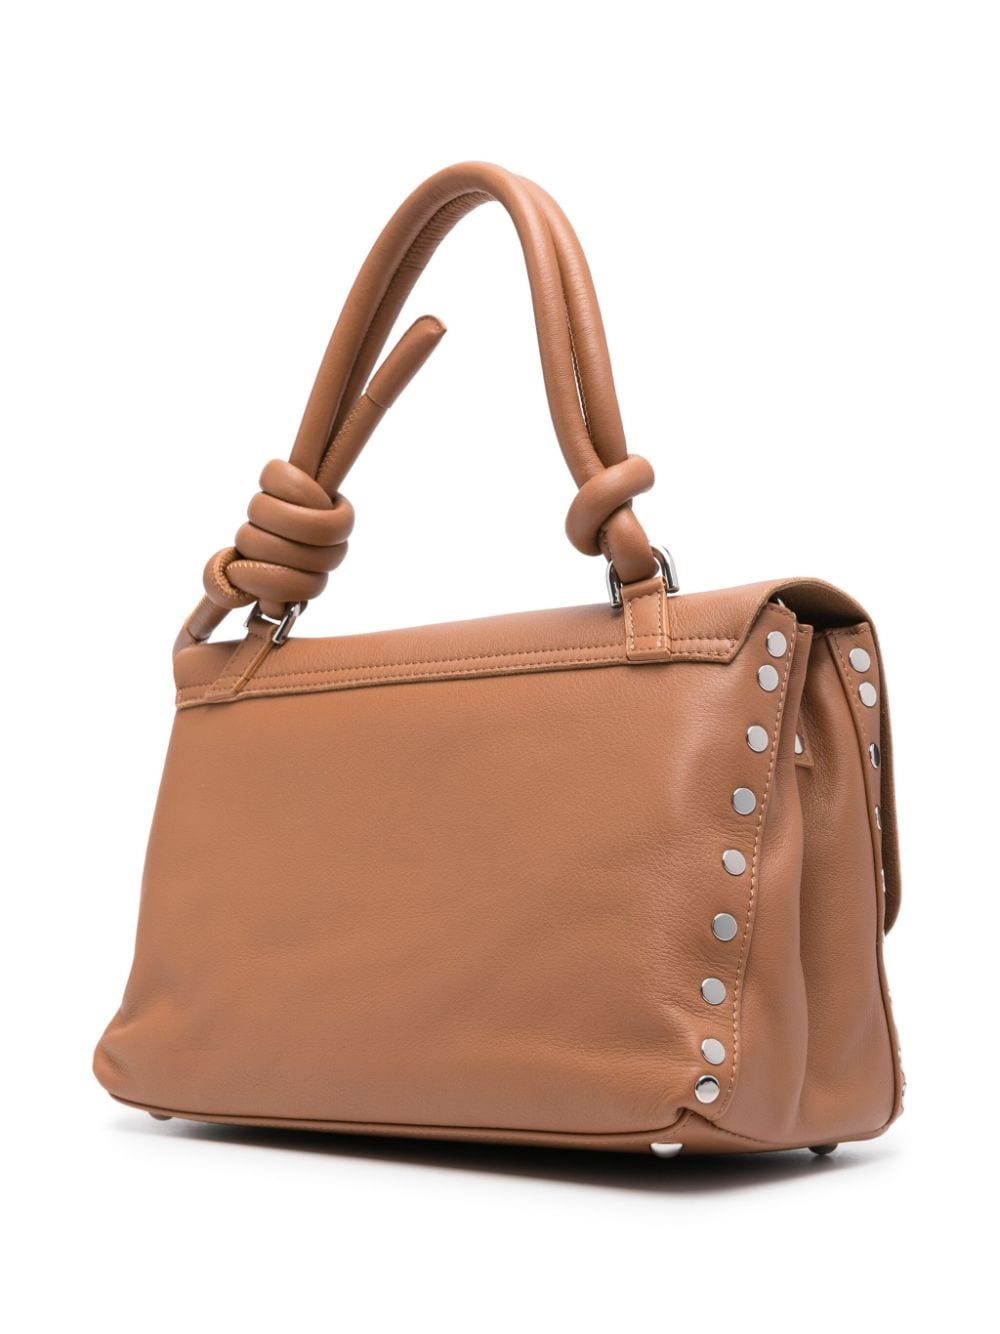 Sugar Brown Leather Handbag with Unique Knot Detailing and Silver Hardware